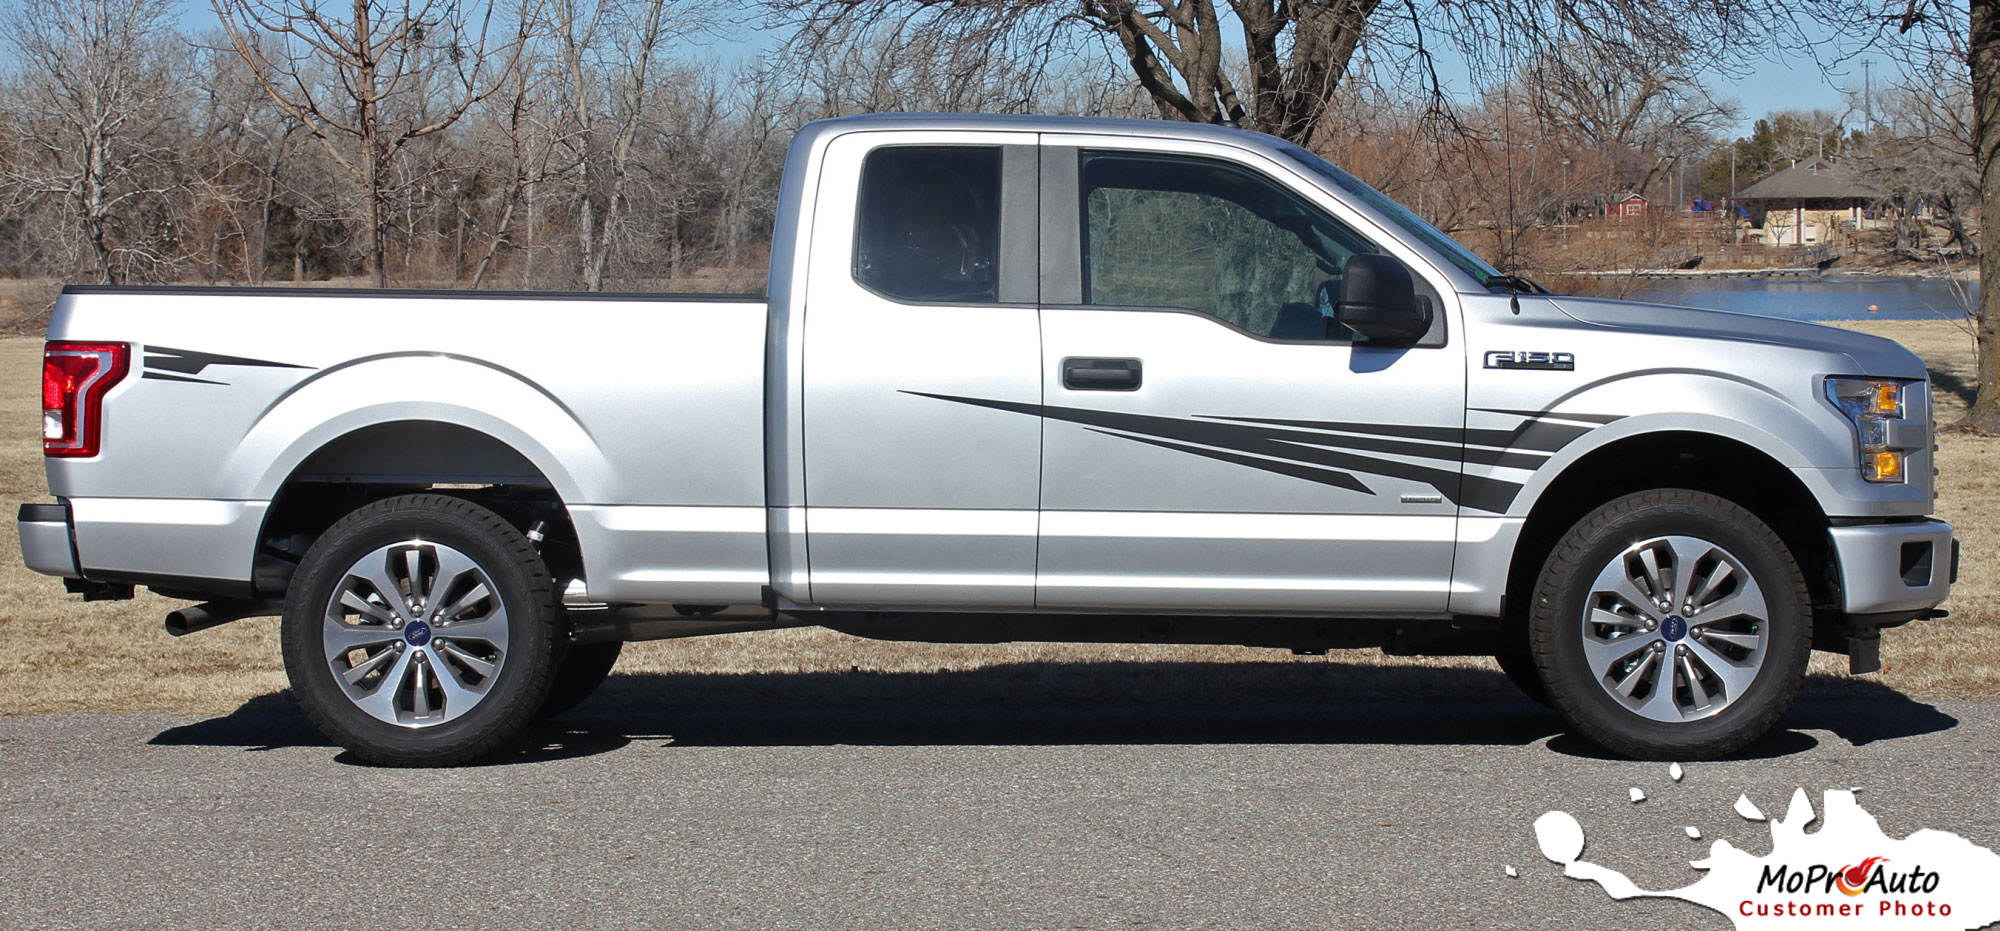 Apollo Fender Door Ford F-Series F-150 Appearance Package Vinyl Graphics and Decals Kit - Customer Photo